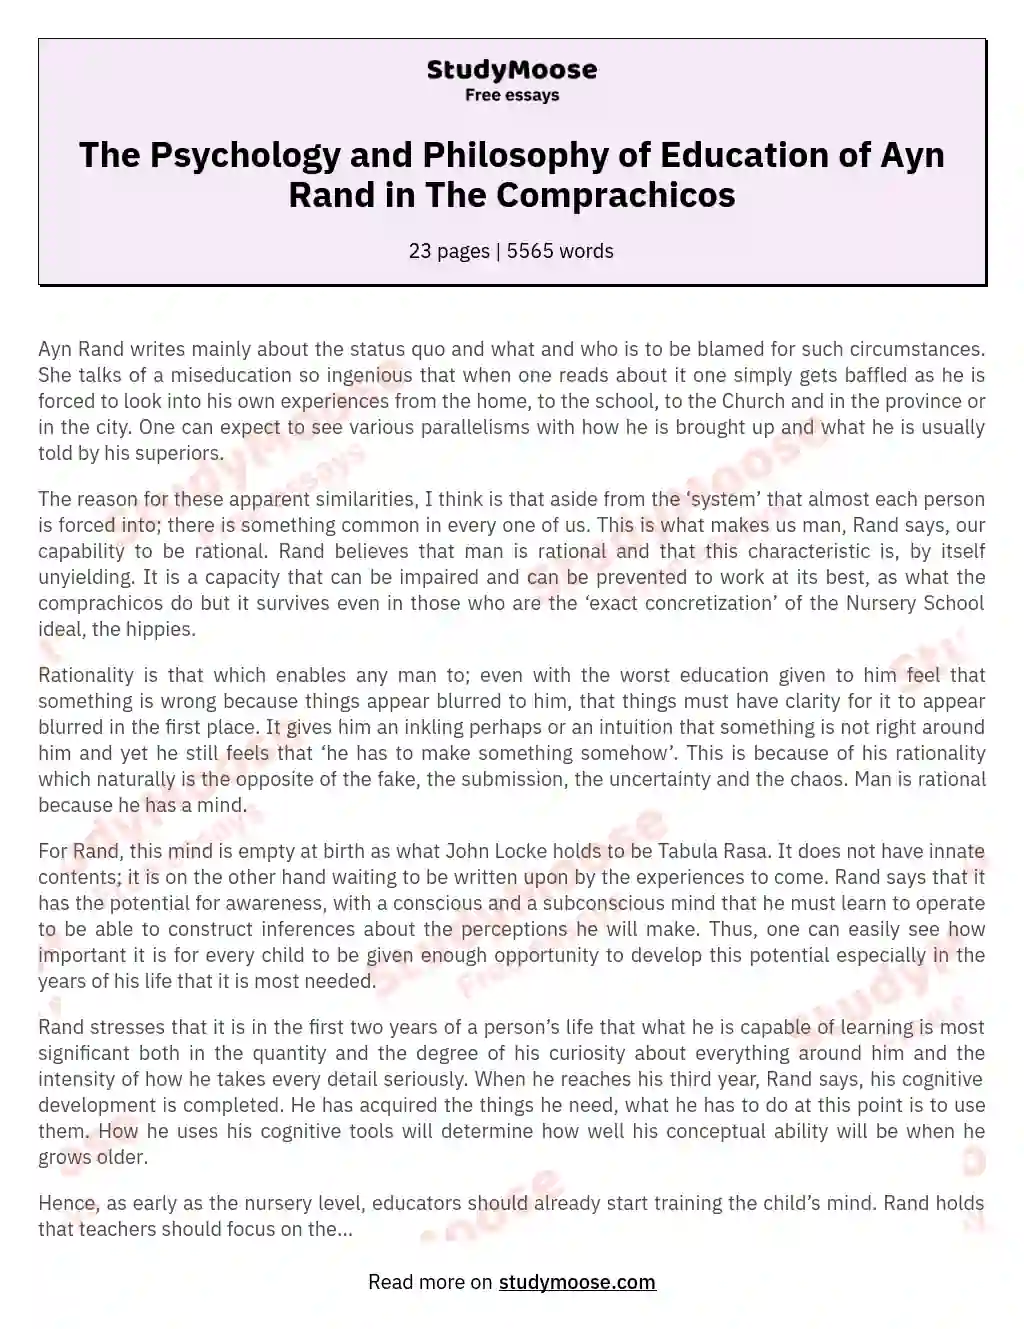 The Psychology and Philosophy of Education of Ayn Rand in The Comprachicos